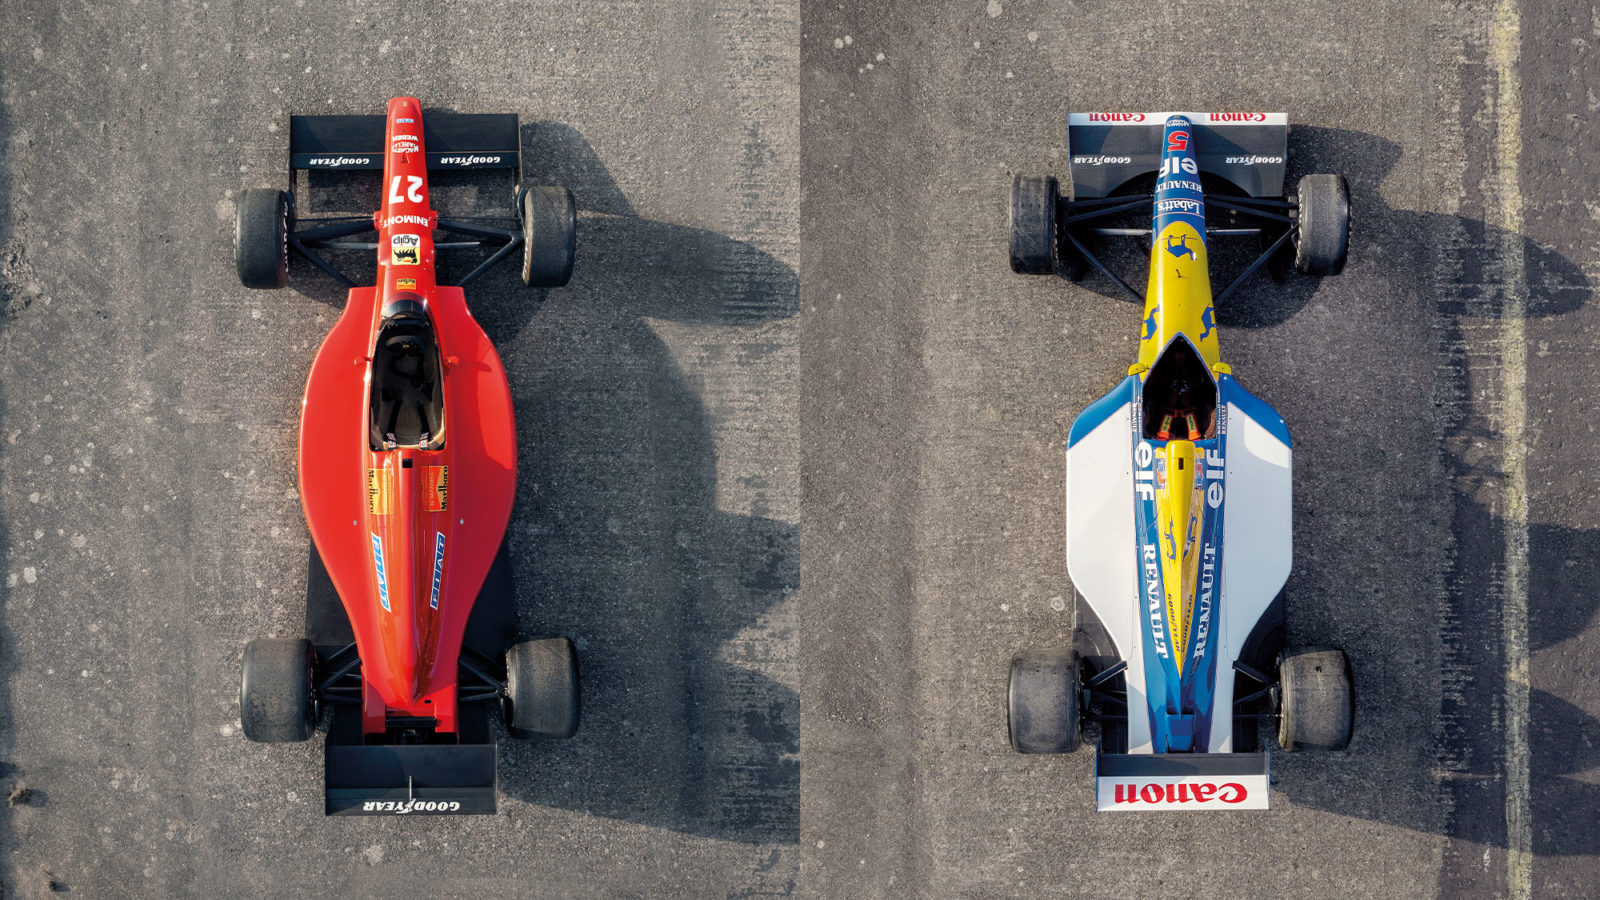 Overhead view of Nigel Mansell Ferrari 640 and Williams FW14